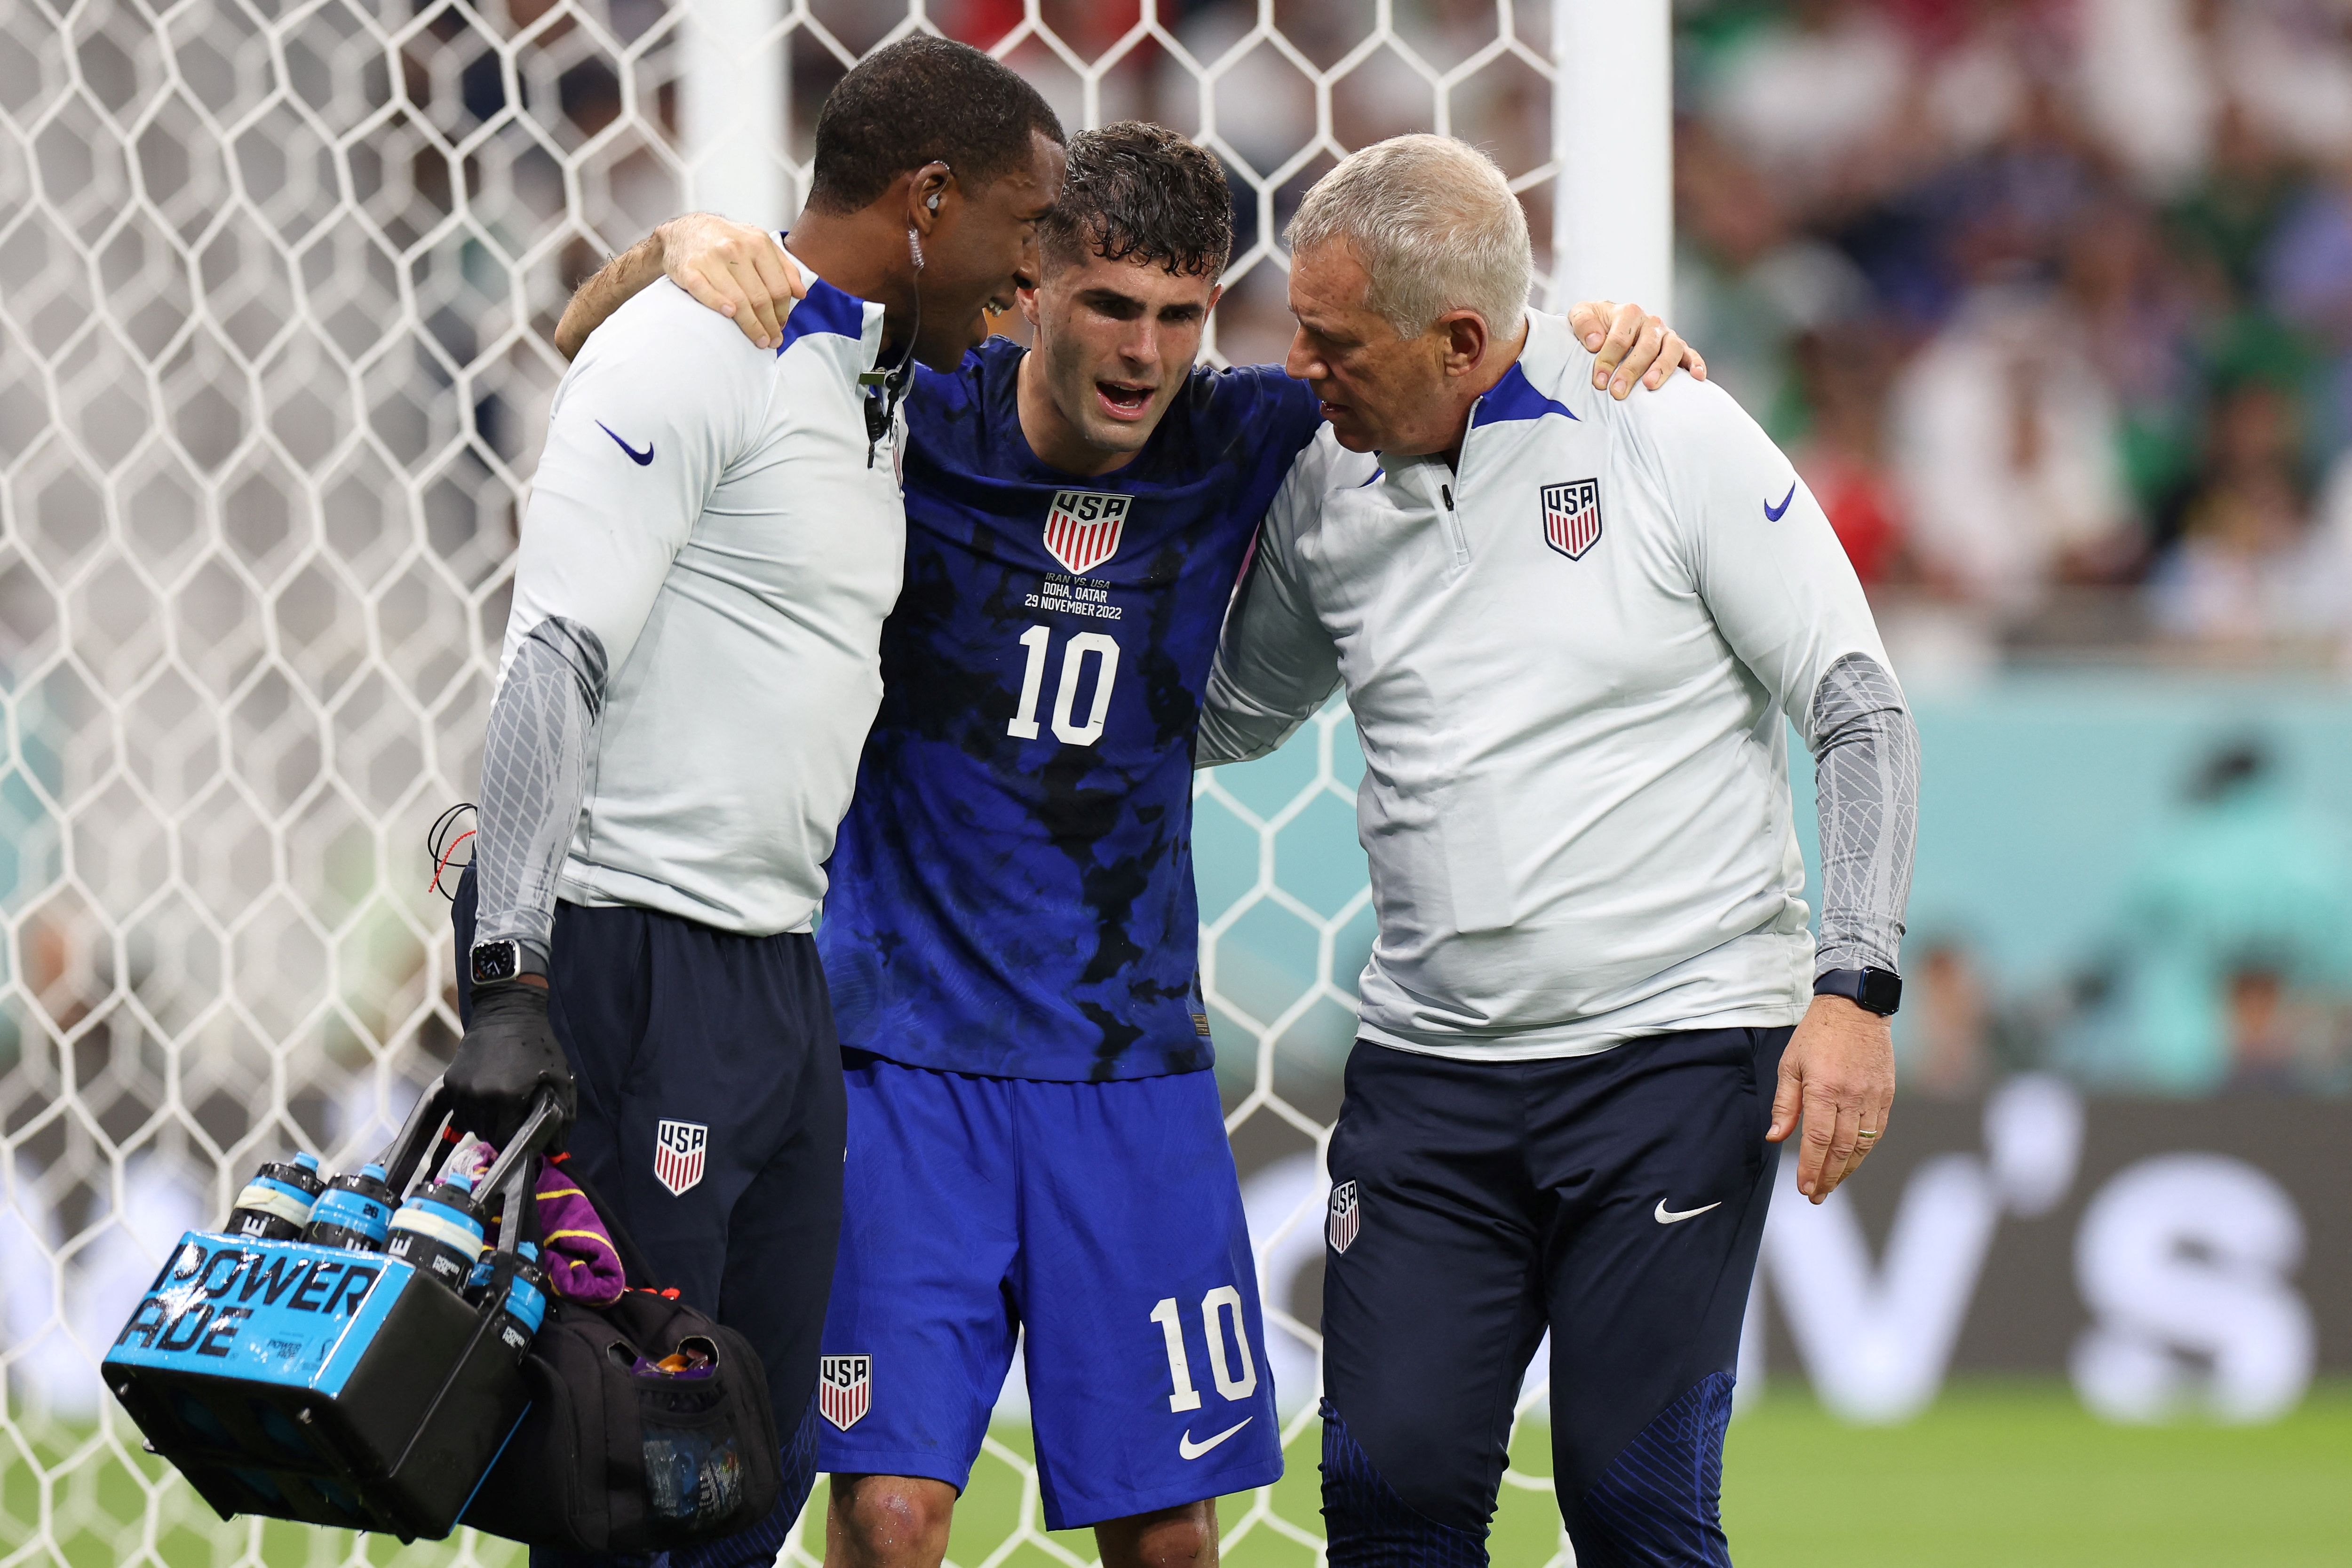 The United States trembles: they confirmed Christian Pulisic’s injury and it will continue day by day